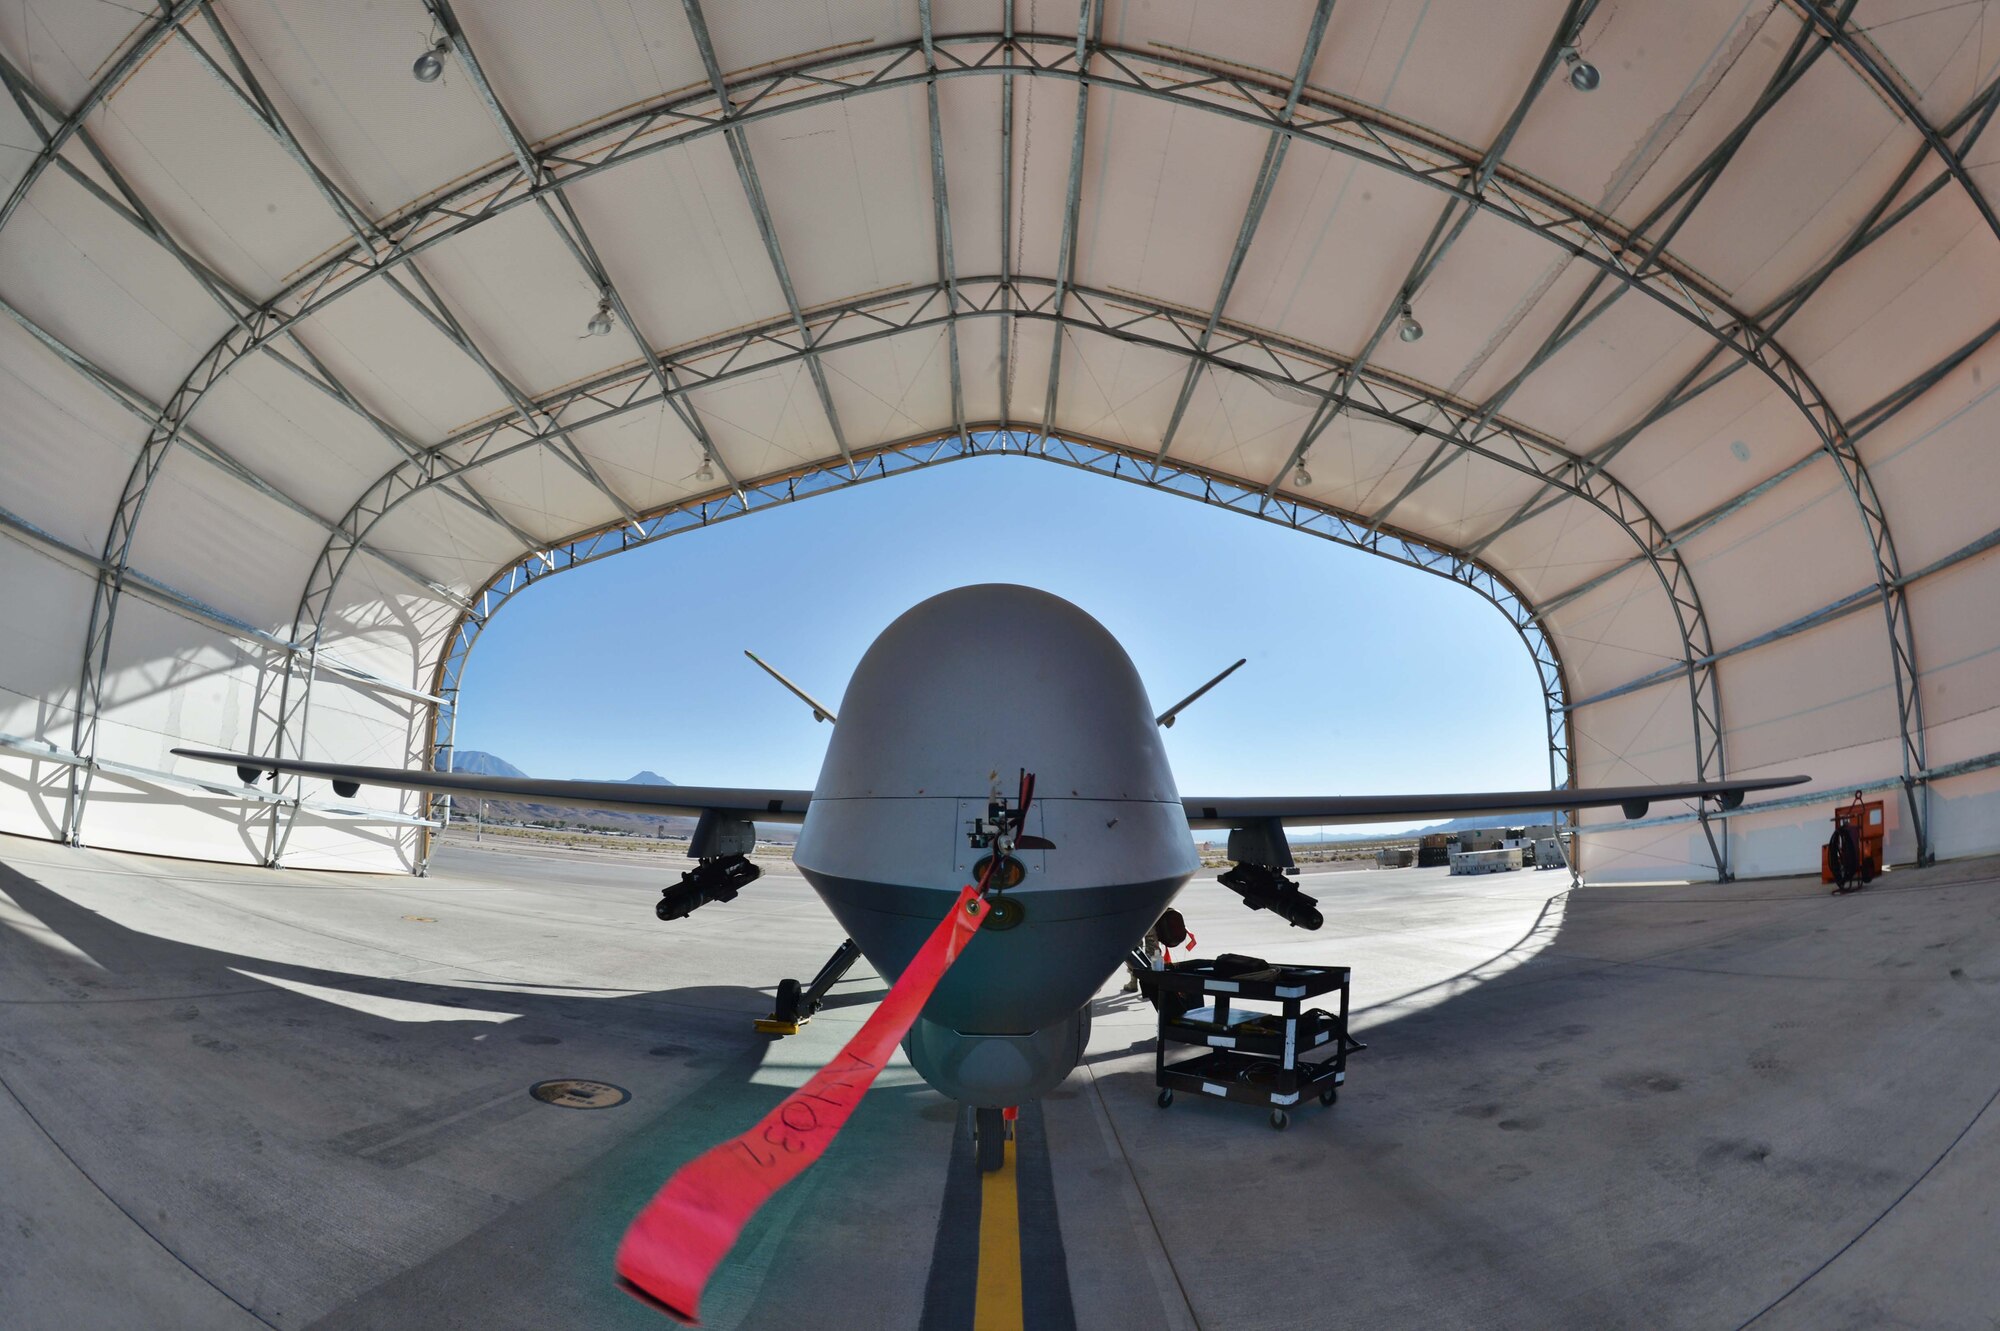 An MQ-9 Reaper sits prior to a launch in support of Red Flag 16-3 July 20, 2016, at Creech Air Force Base, Nevada. The exercise incorporates scenarios in air, space and cyber systems to provide aircrews realistic training for combat operations. (U.S. Air Force photo by Airman 1st Class Kristan Campbell/Released)